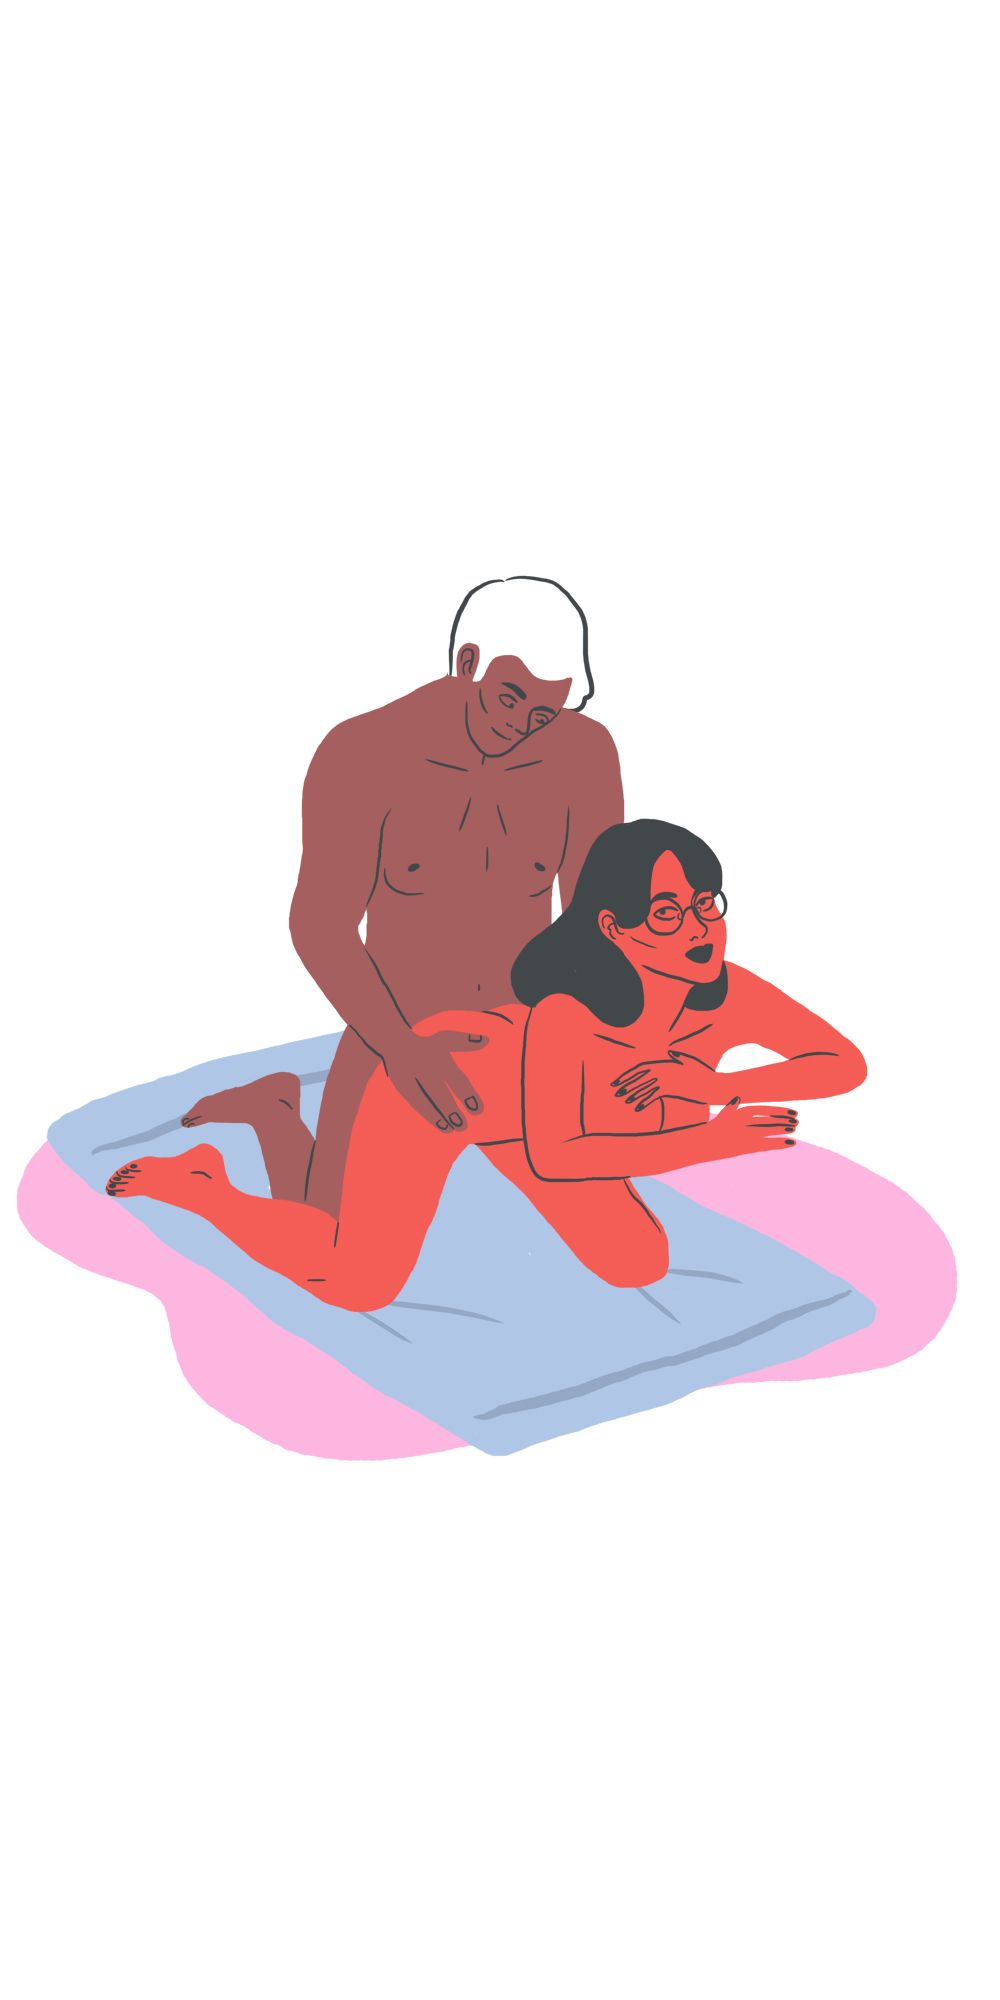 8 Hot Tub Sex Positions That Wont Give You a Damn photo